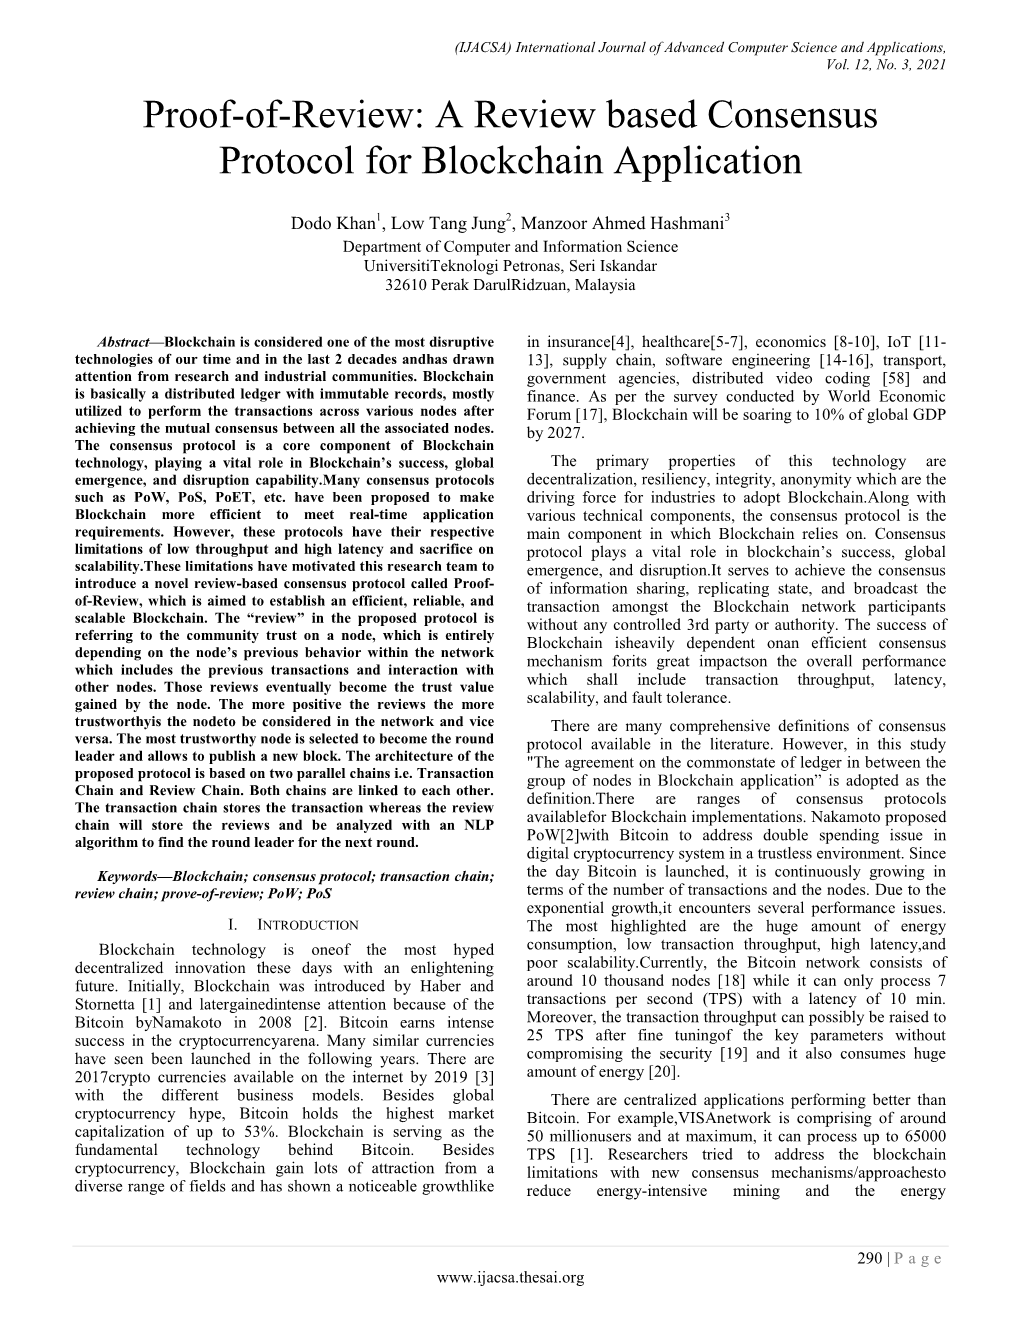 Proof-Of-Review: a Review Based Consensus Protocol for Blockchain Application